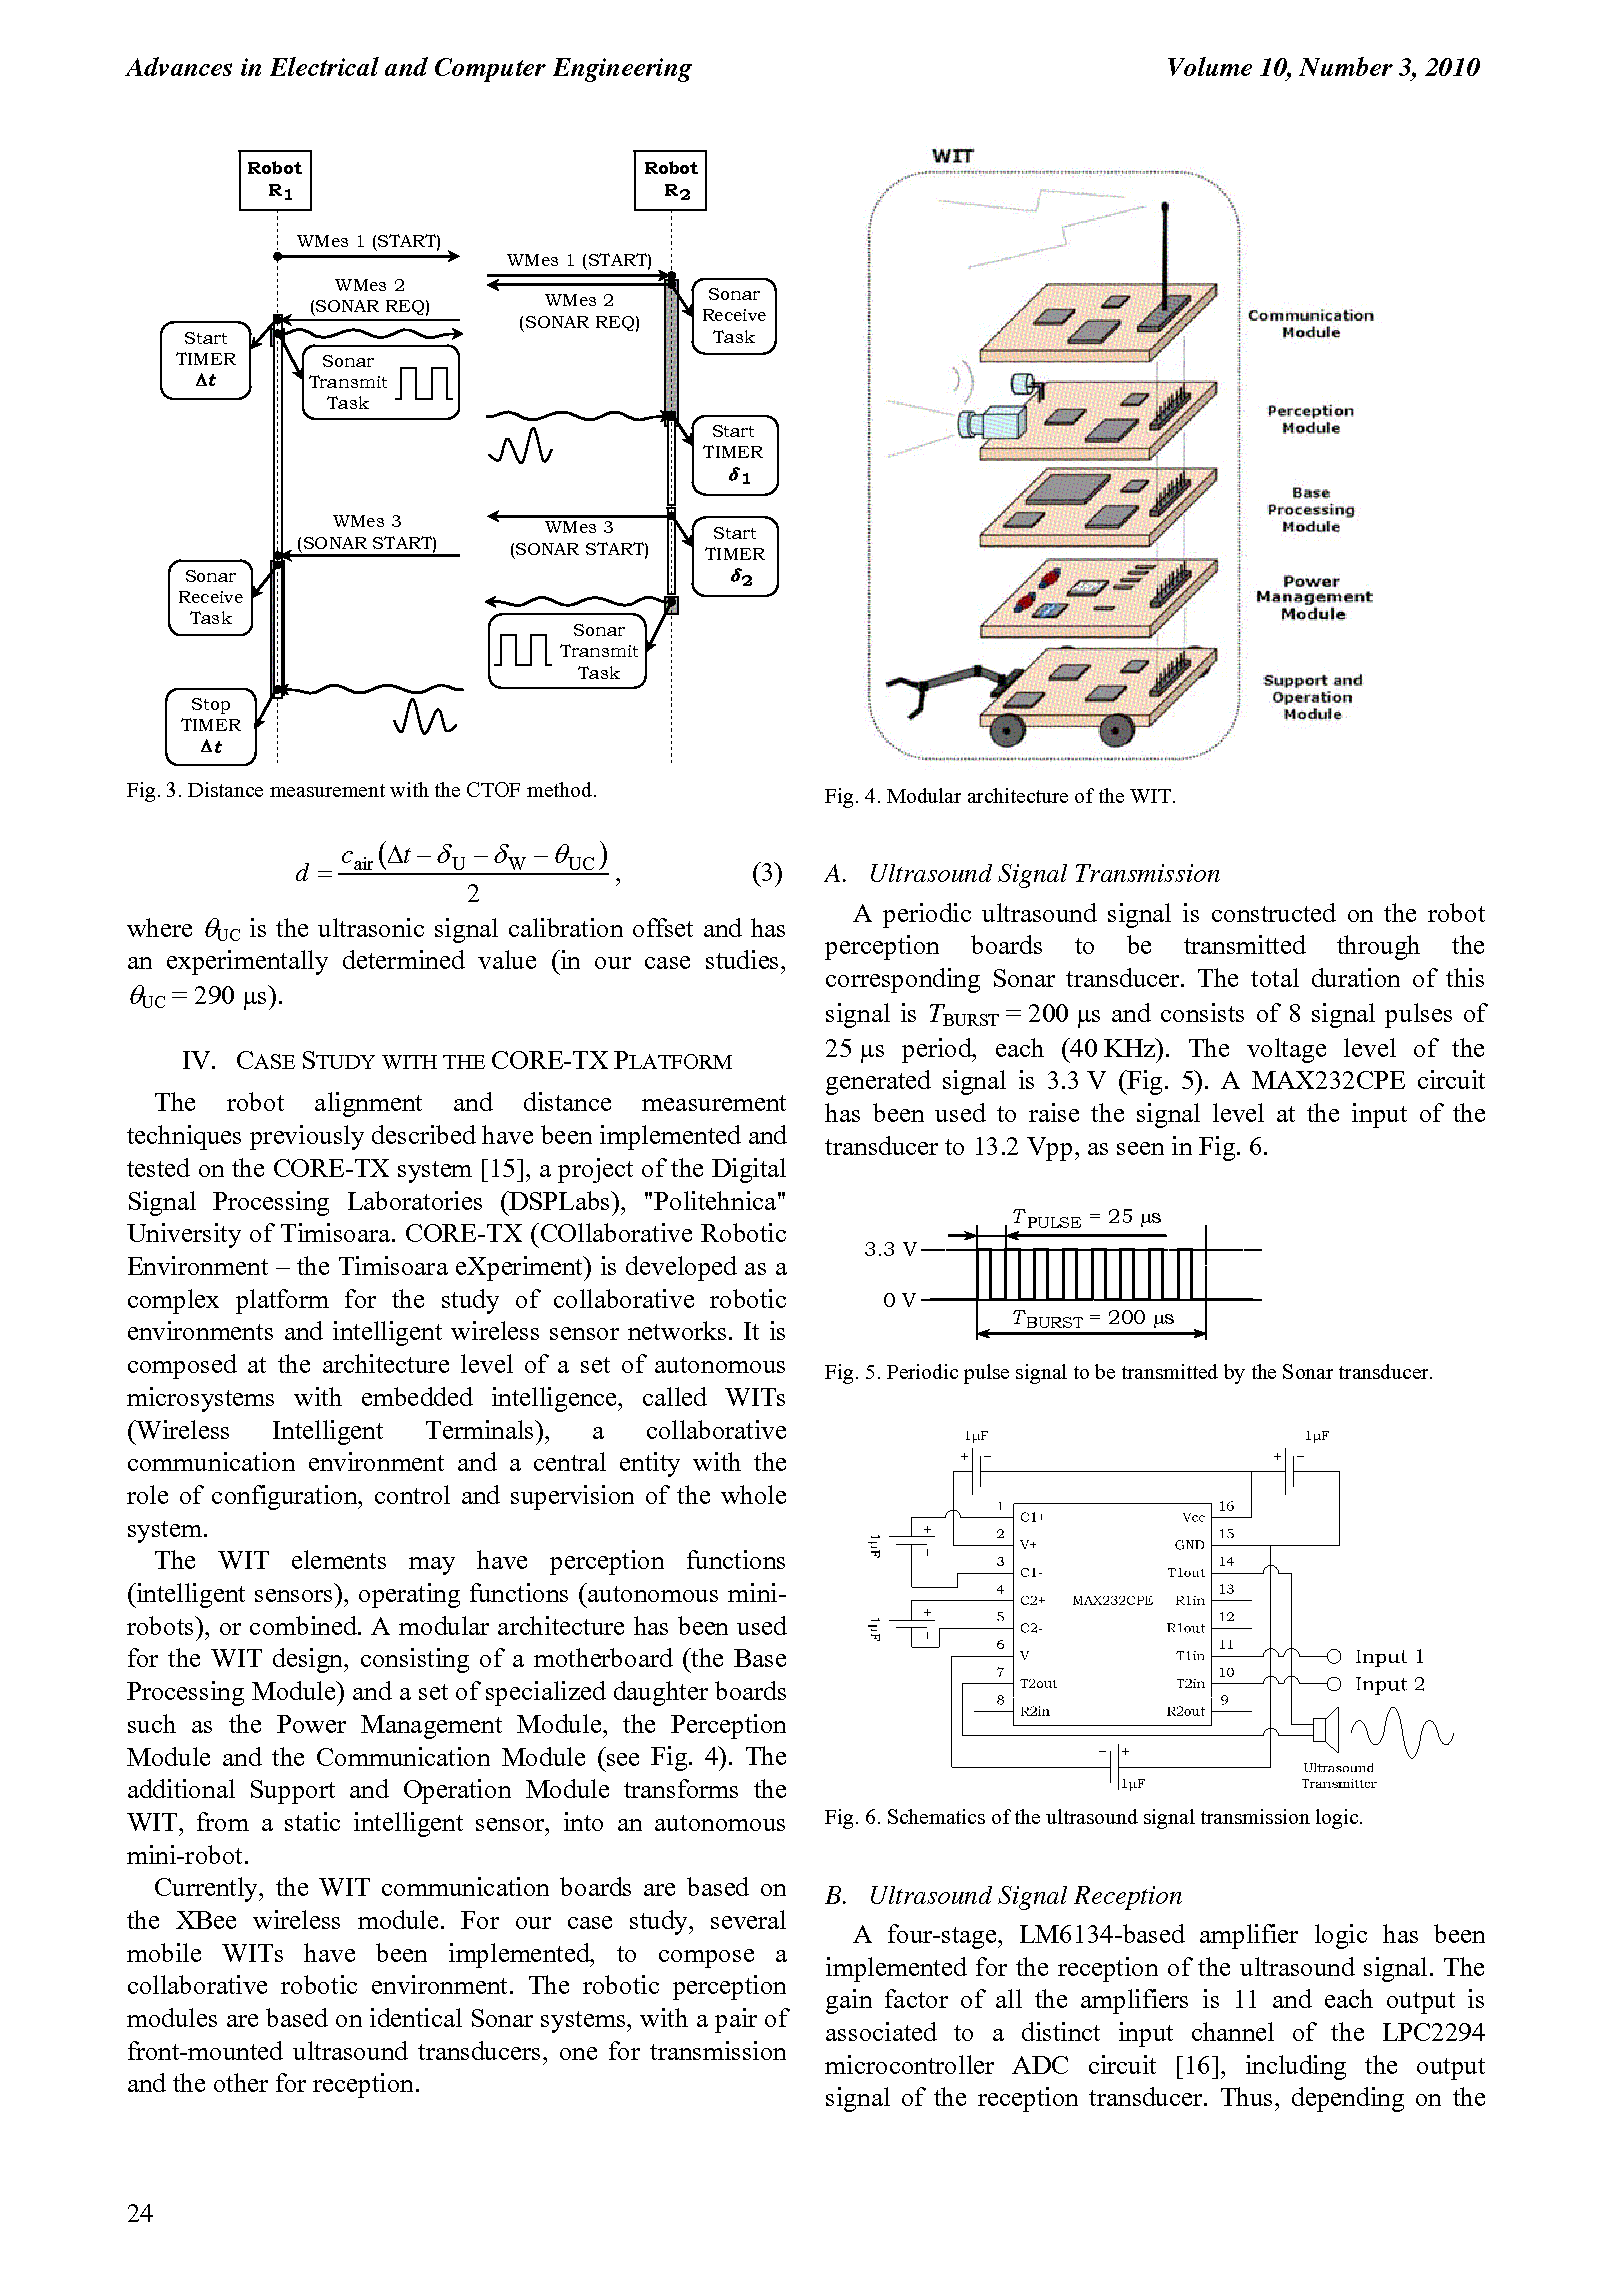 PDF Quickview for paper with DOI:10.4316/AECE.2010.03004